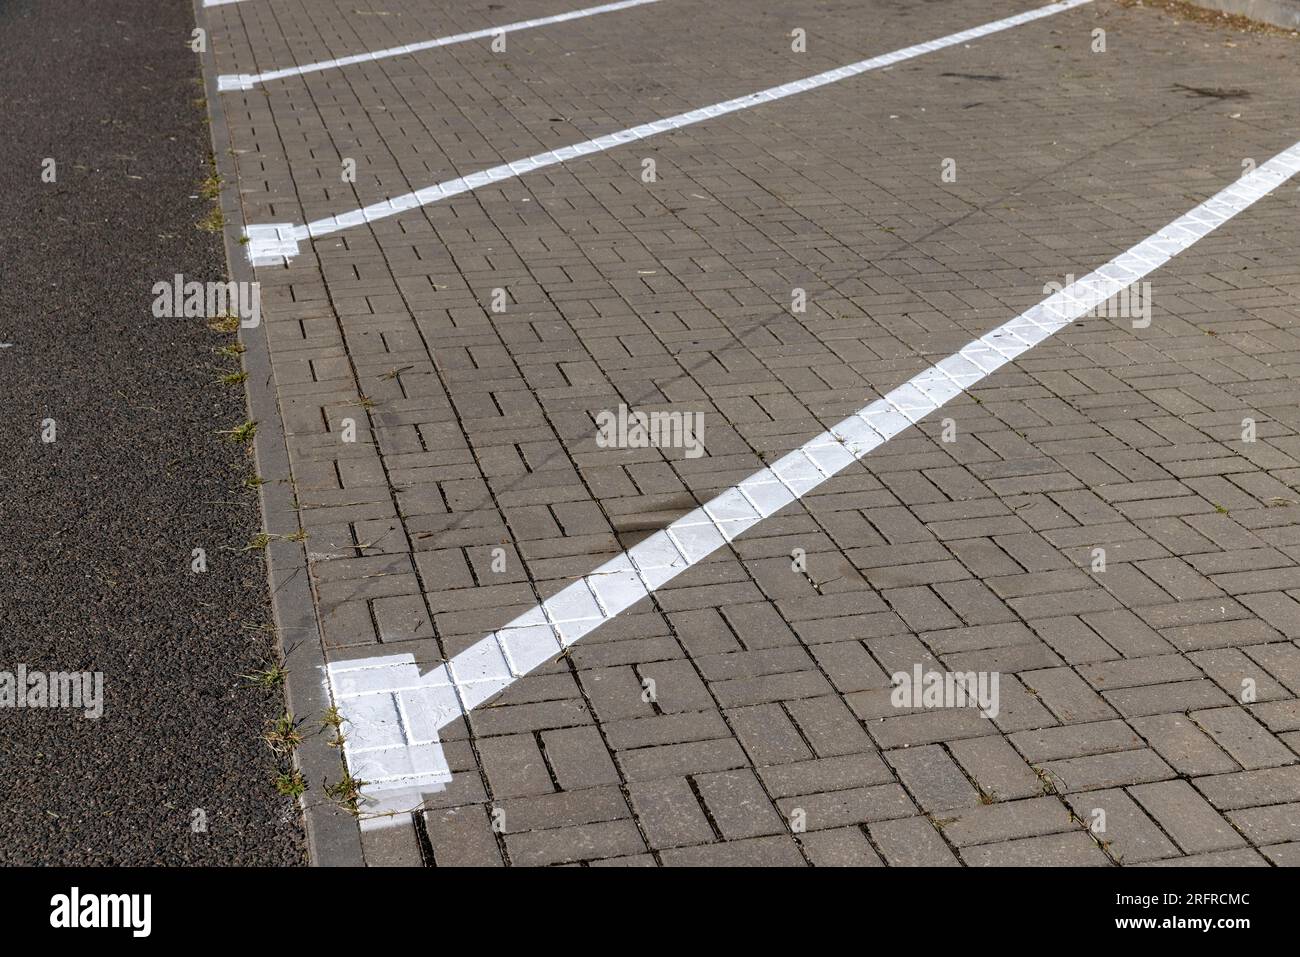 The parking lot is paved with tiles for cars, parking spaces are delimited by white lines Stock Photo